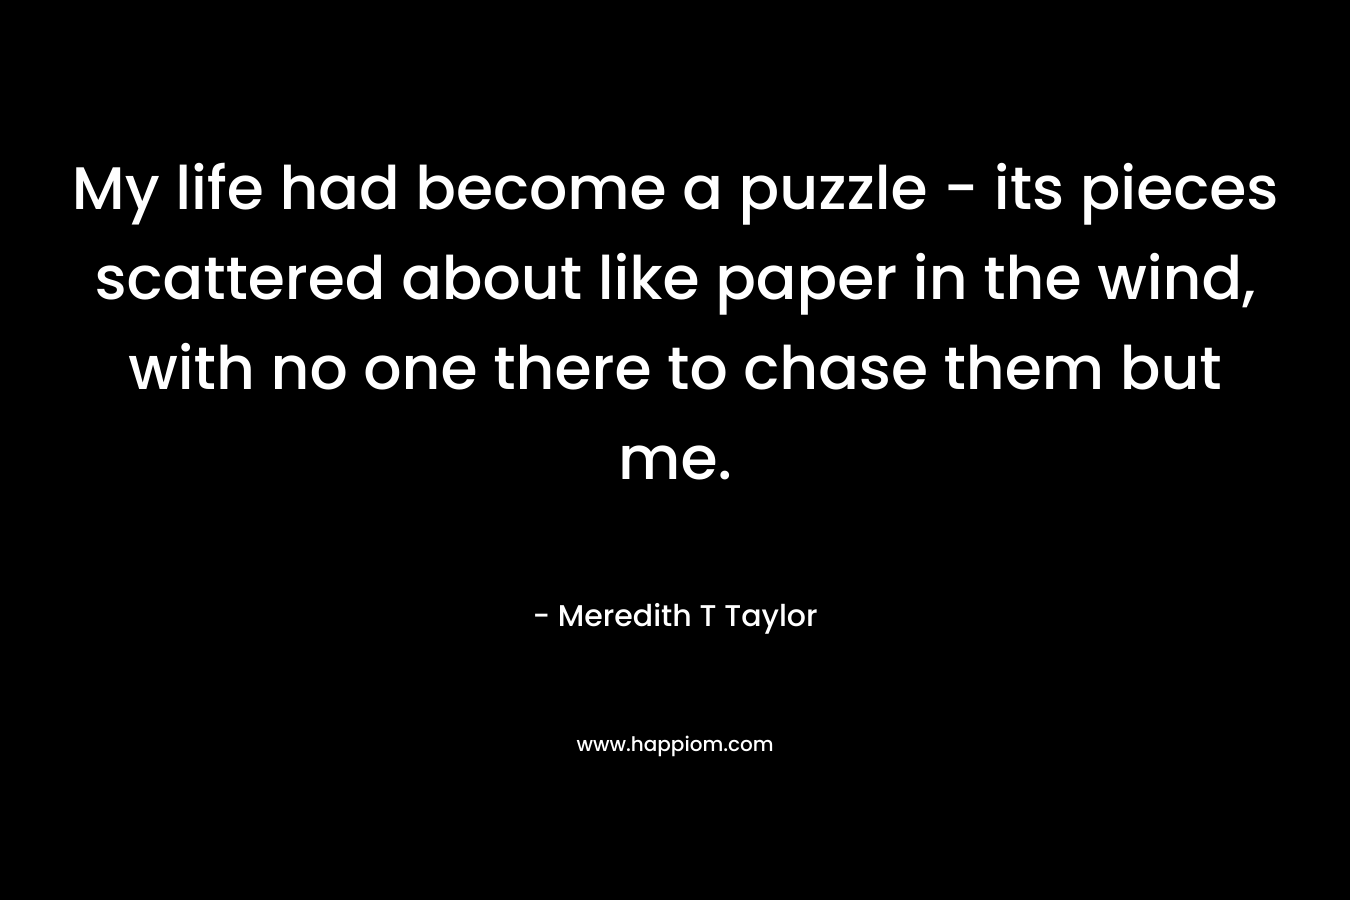 My life had become a puzzle - its pieces scattered about like paper in the wind, with no one there to chase them but me.